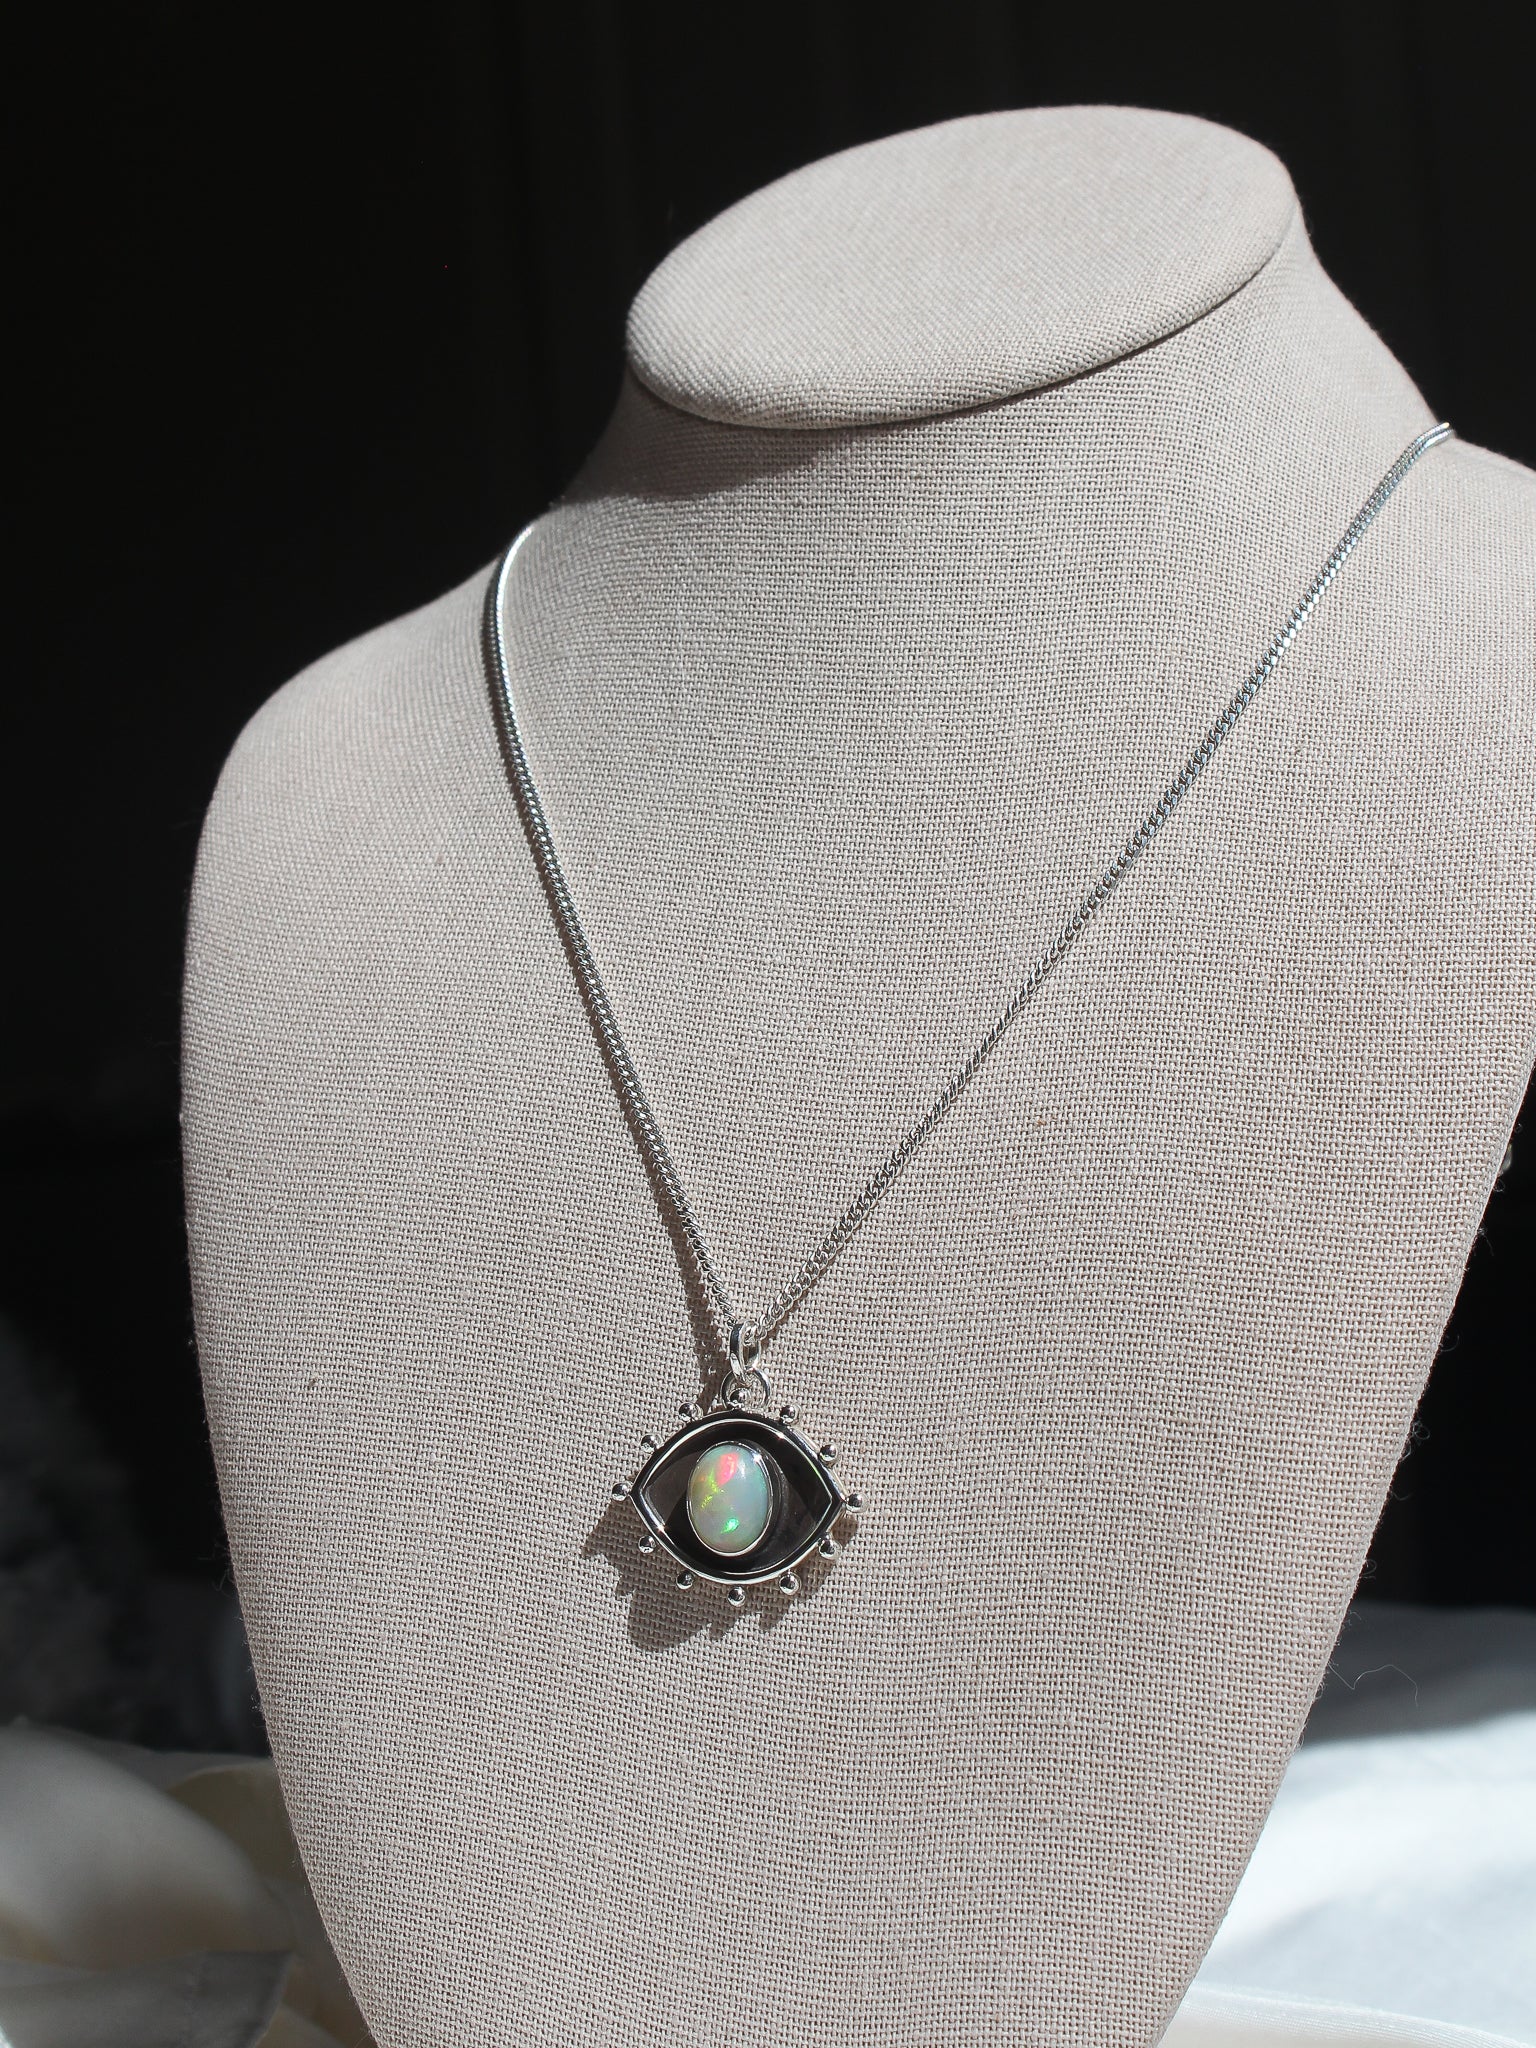 Handmade 925 sterling silver Ethiopian opal set in funky dotted eye shaped setting lily and William jewelry